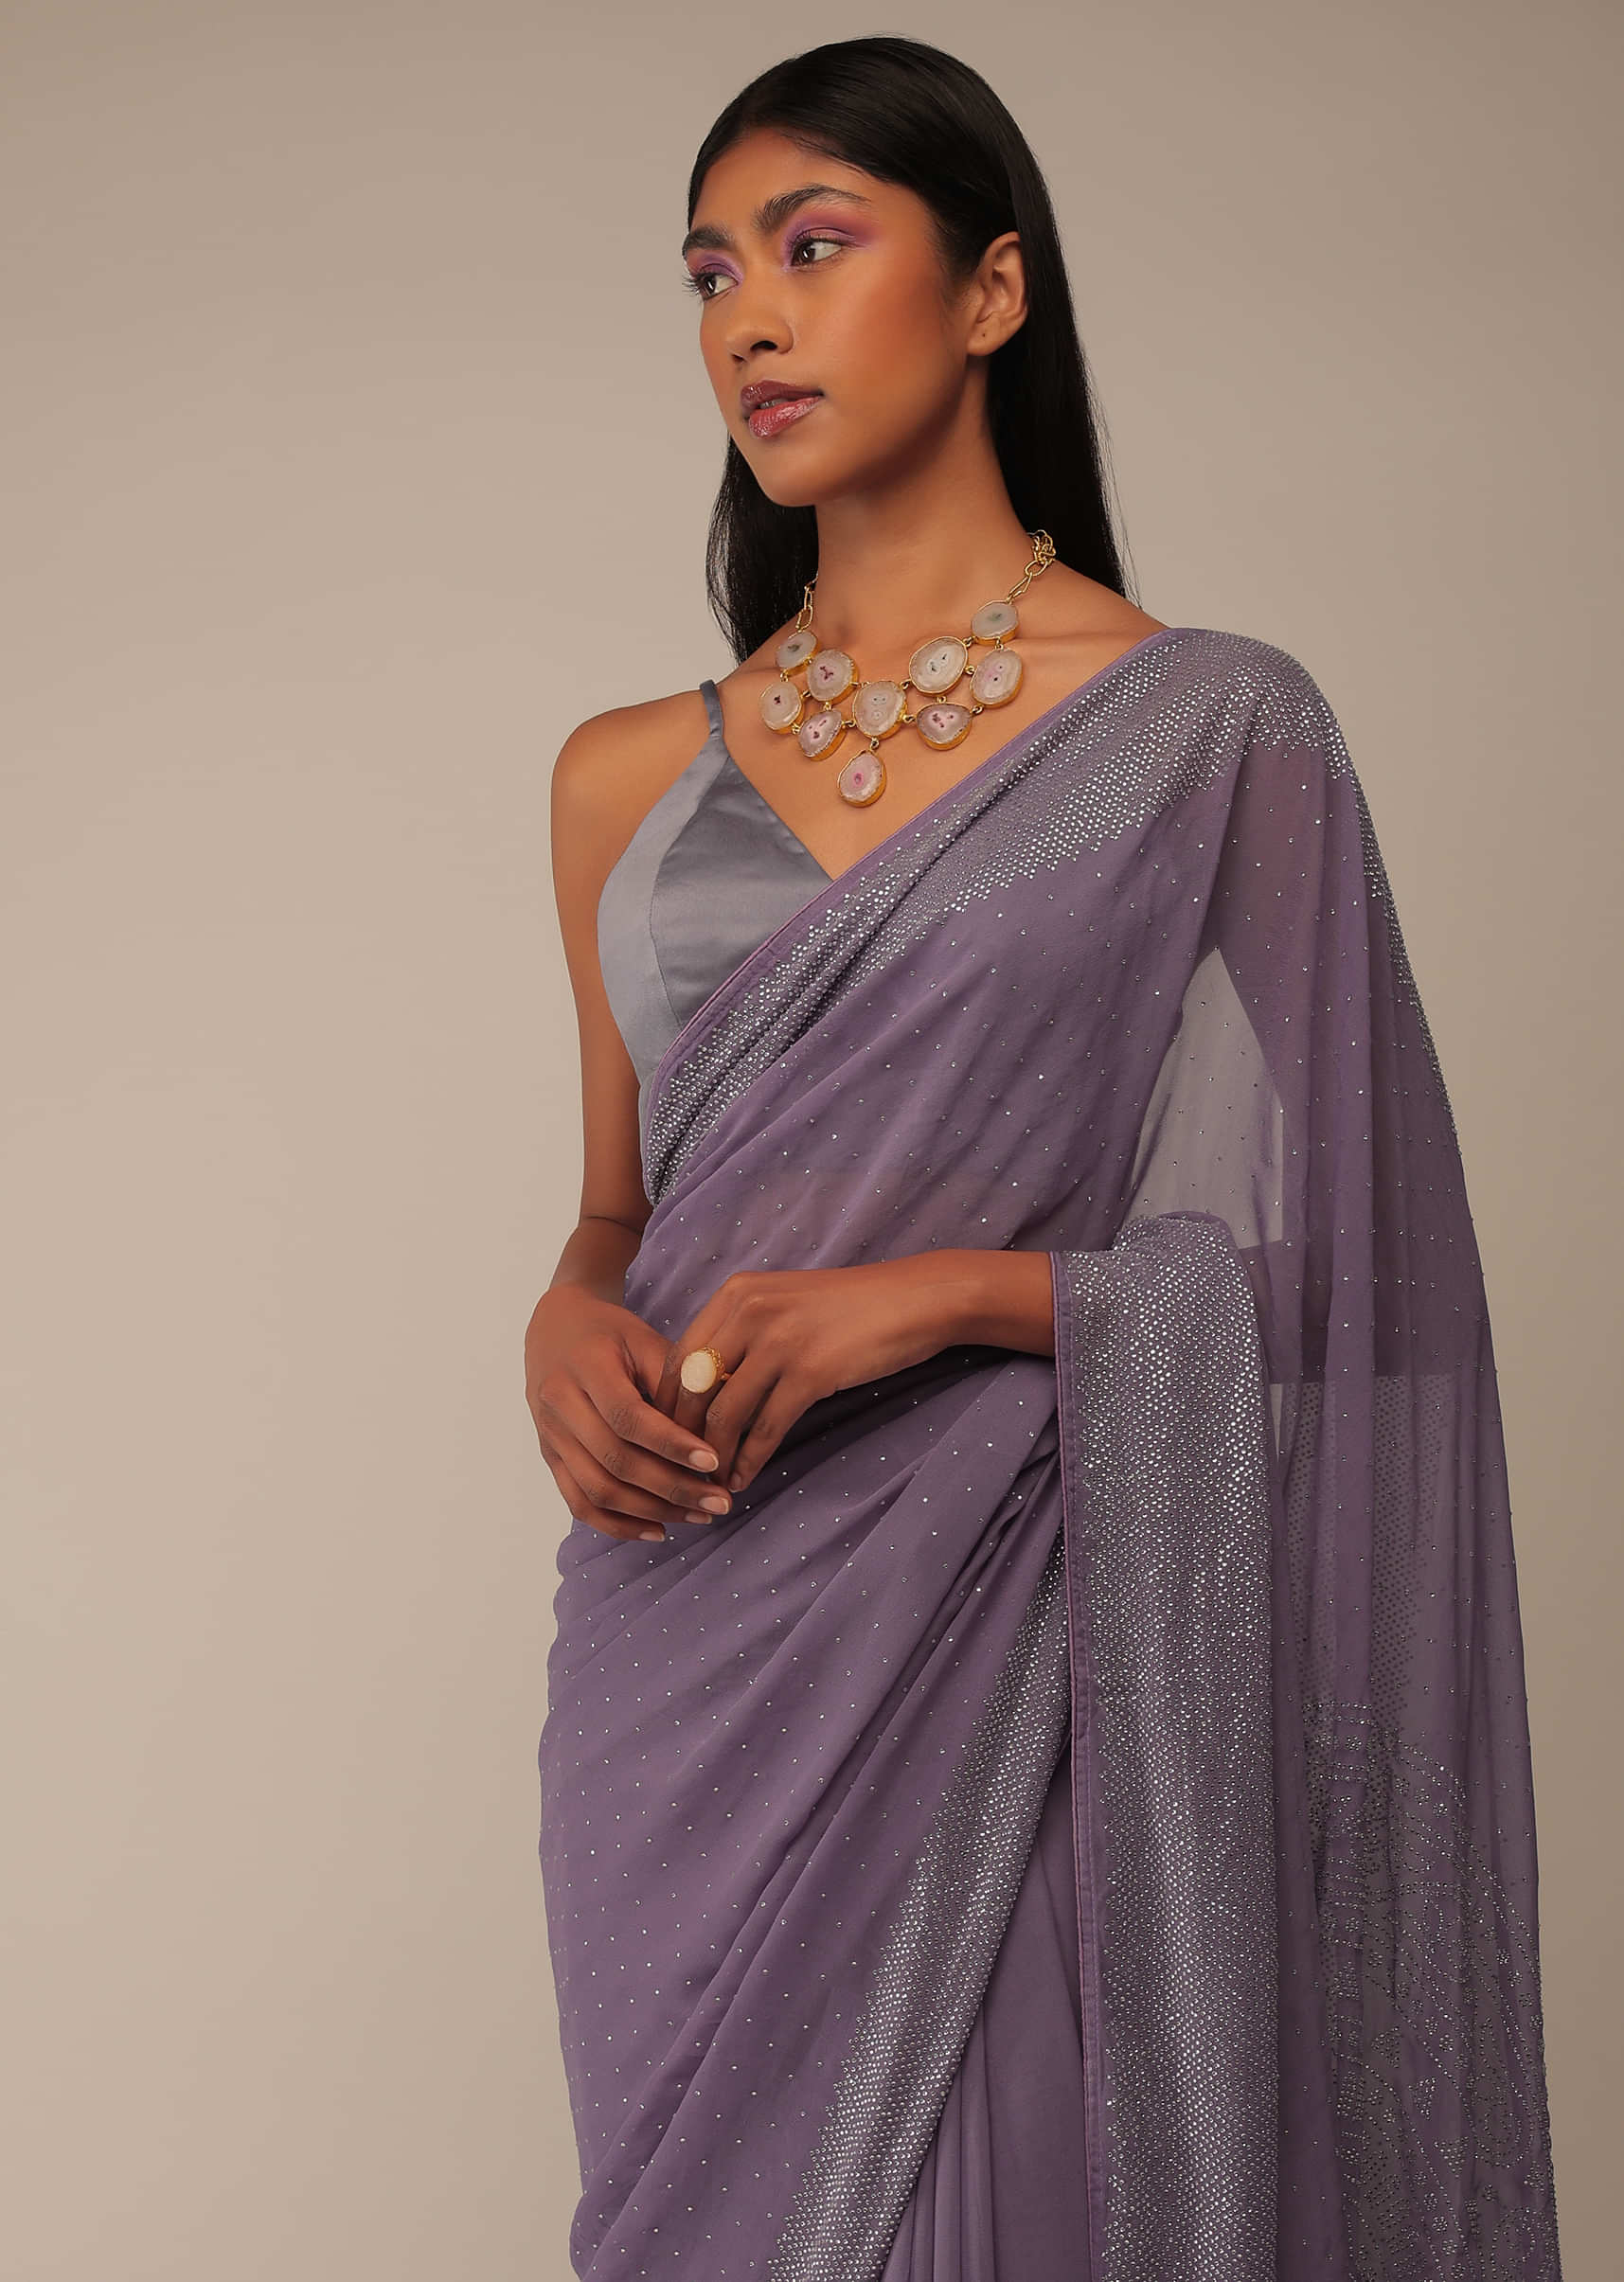 Haze Purple Saree In Stones Embroidery Crafted In Georgette With Scattered Stones